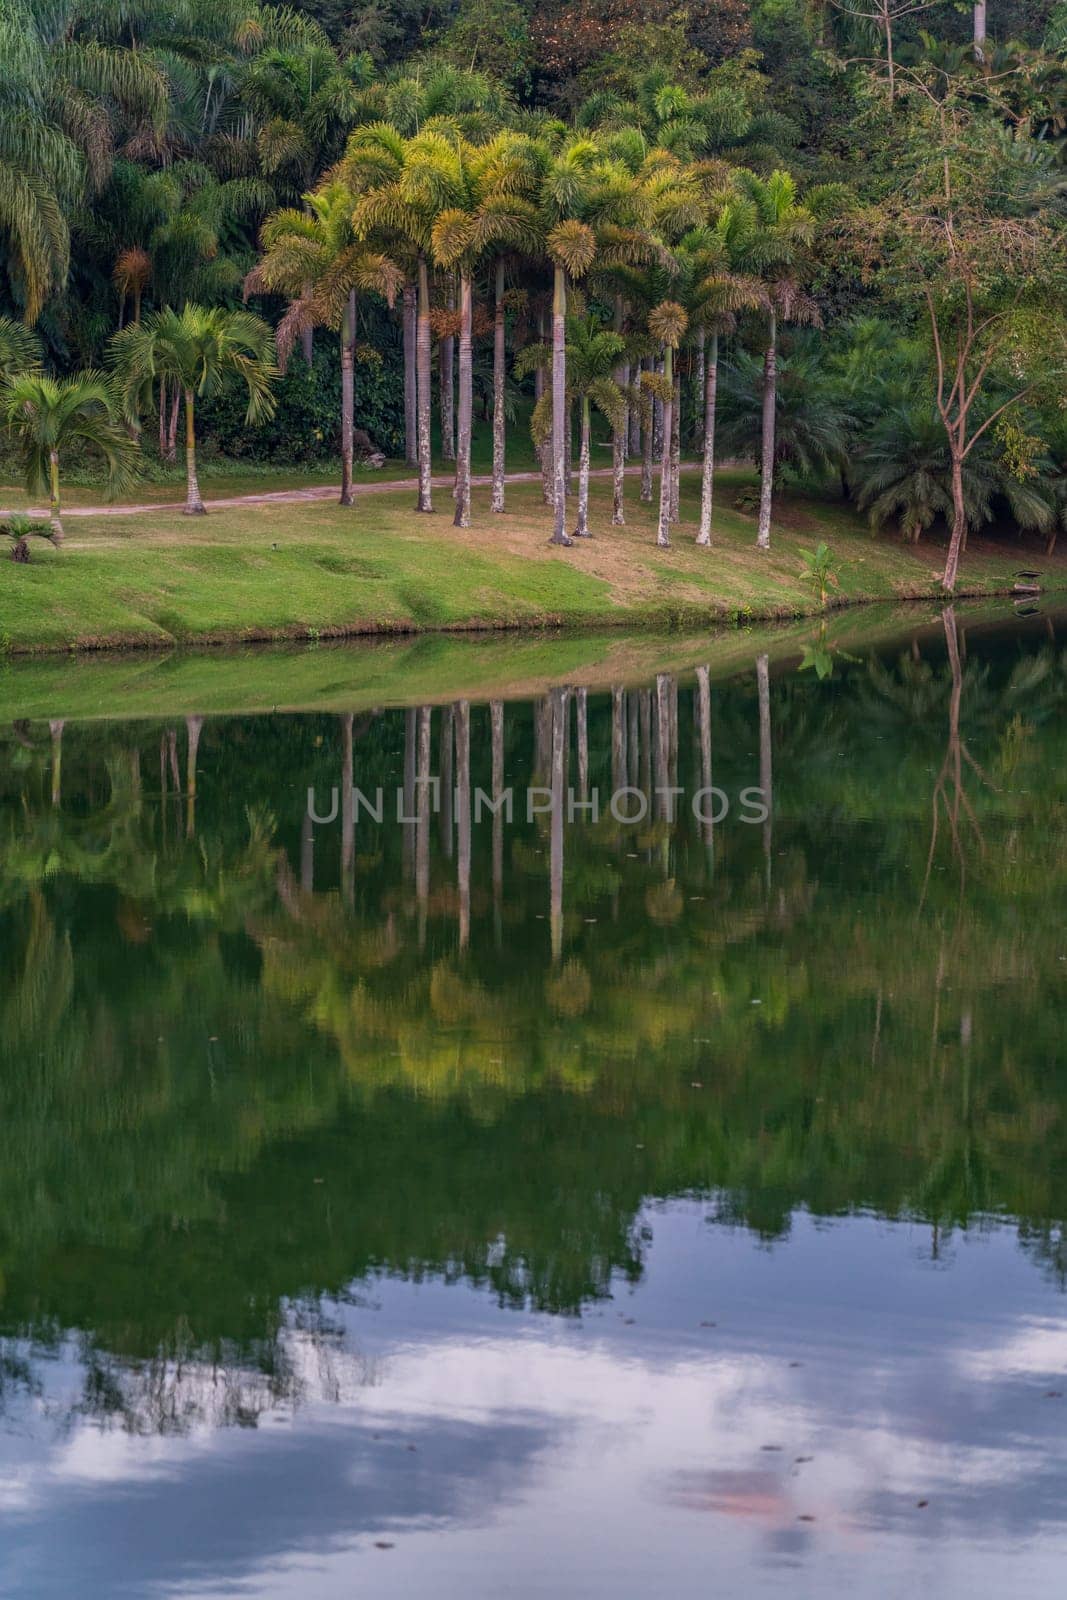 Tropical scene with calm waters reflecting palm trees.